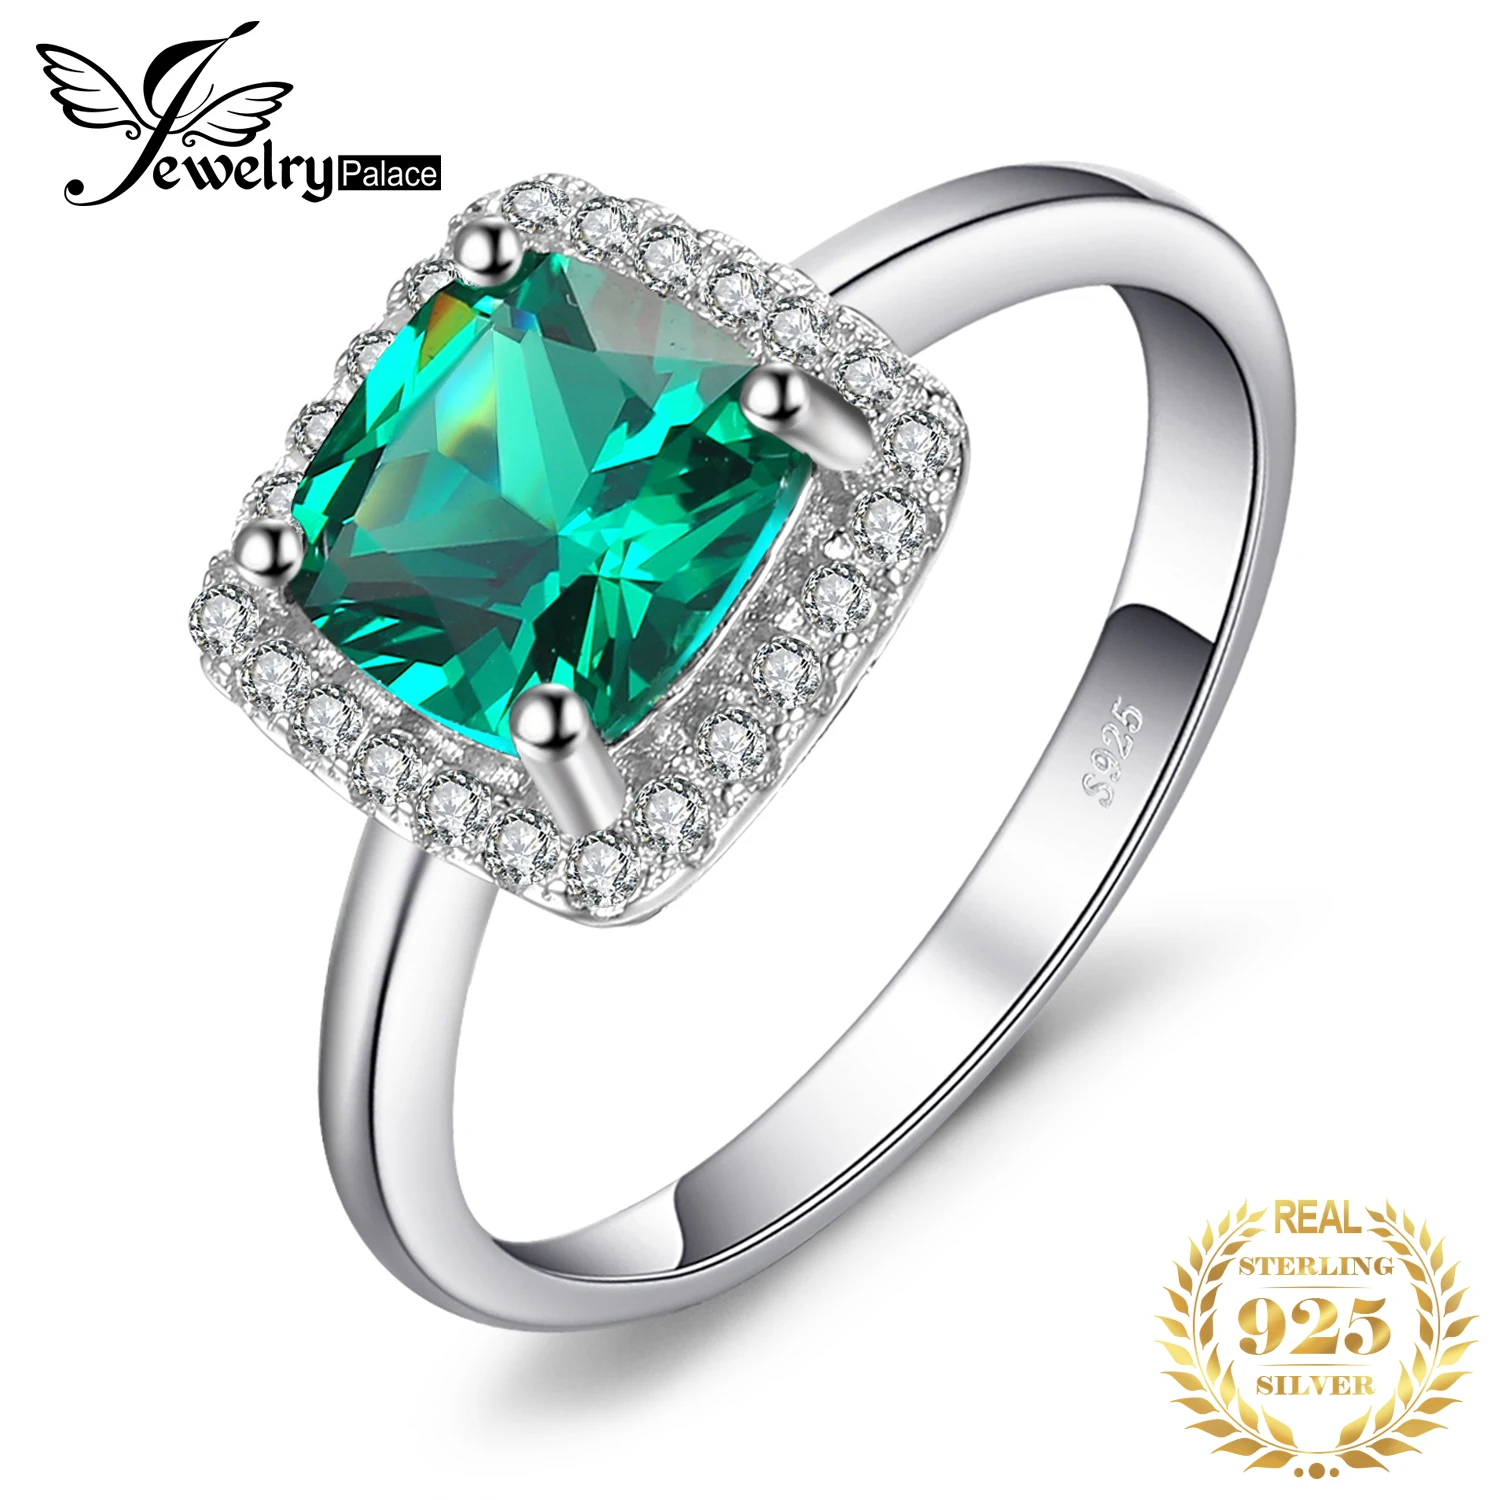 JewelryPalace Green Simulated Nano Emerald  925 Sterling Silver Rings for Women Halo Engagement Ring Statement Gemstones Jewelry